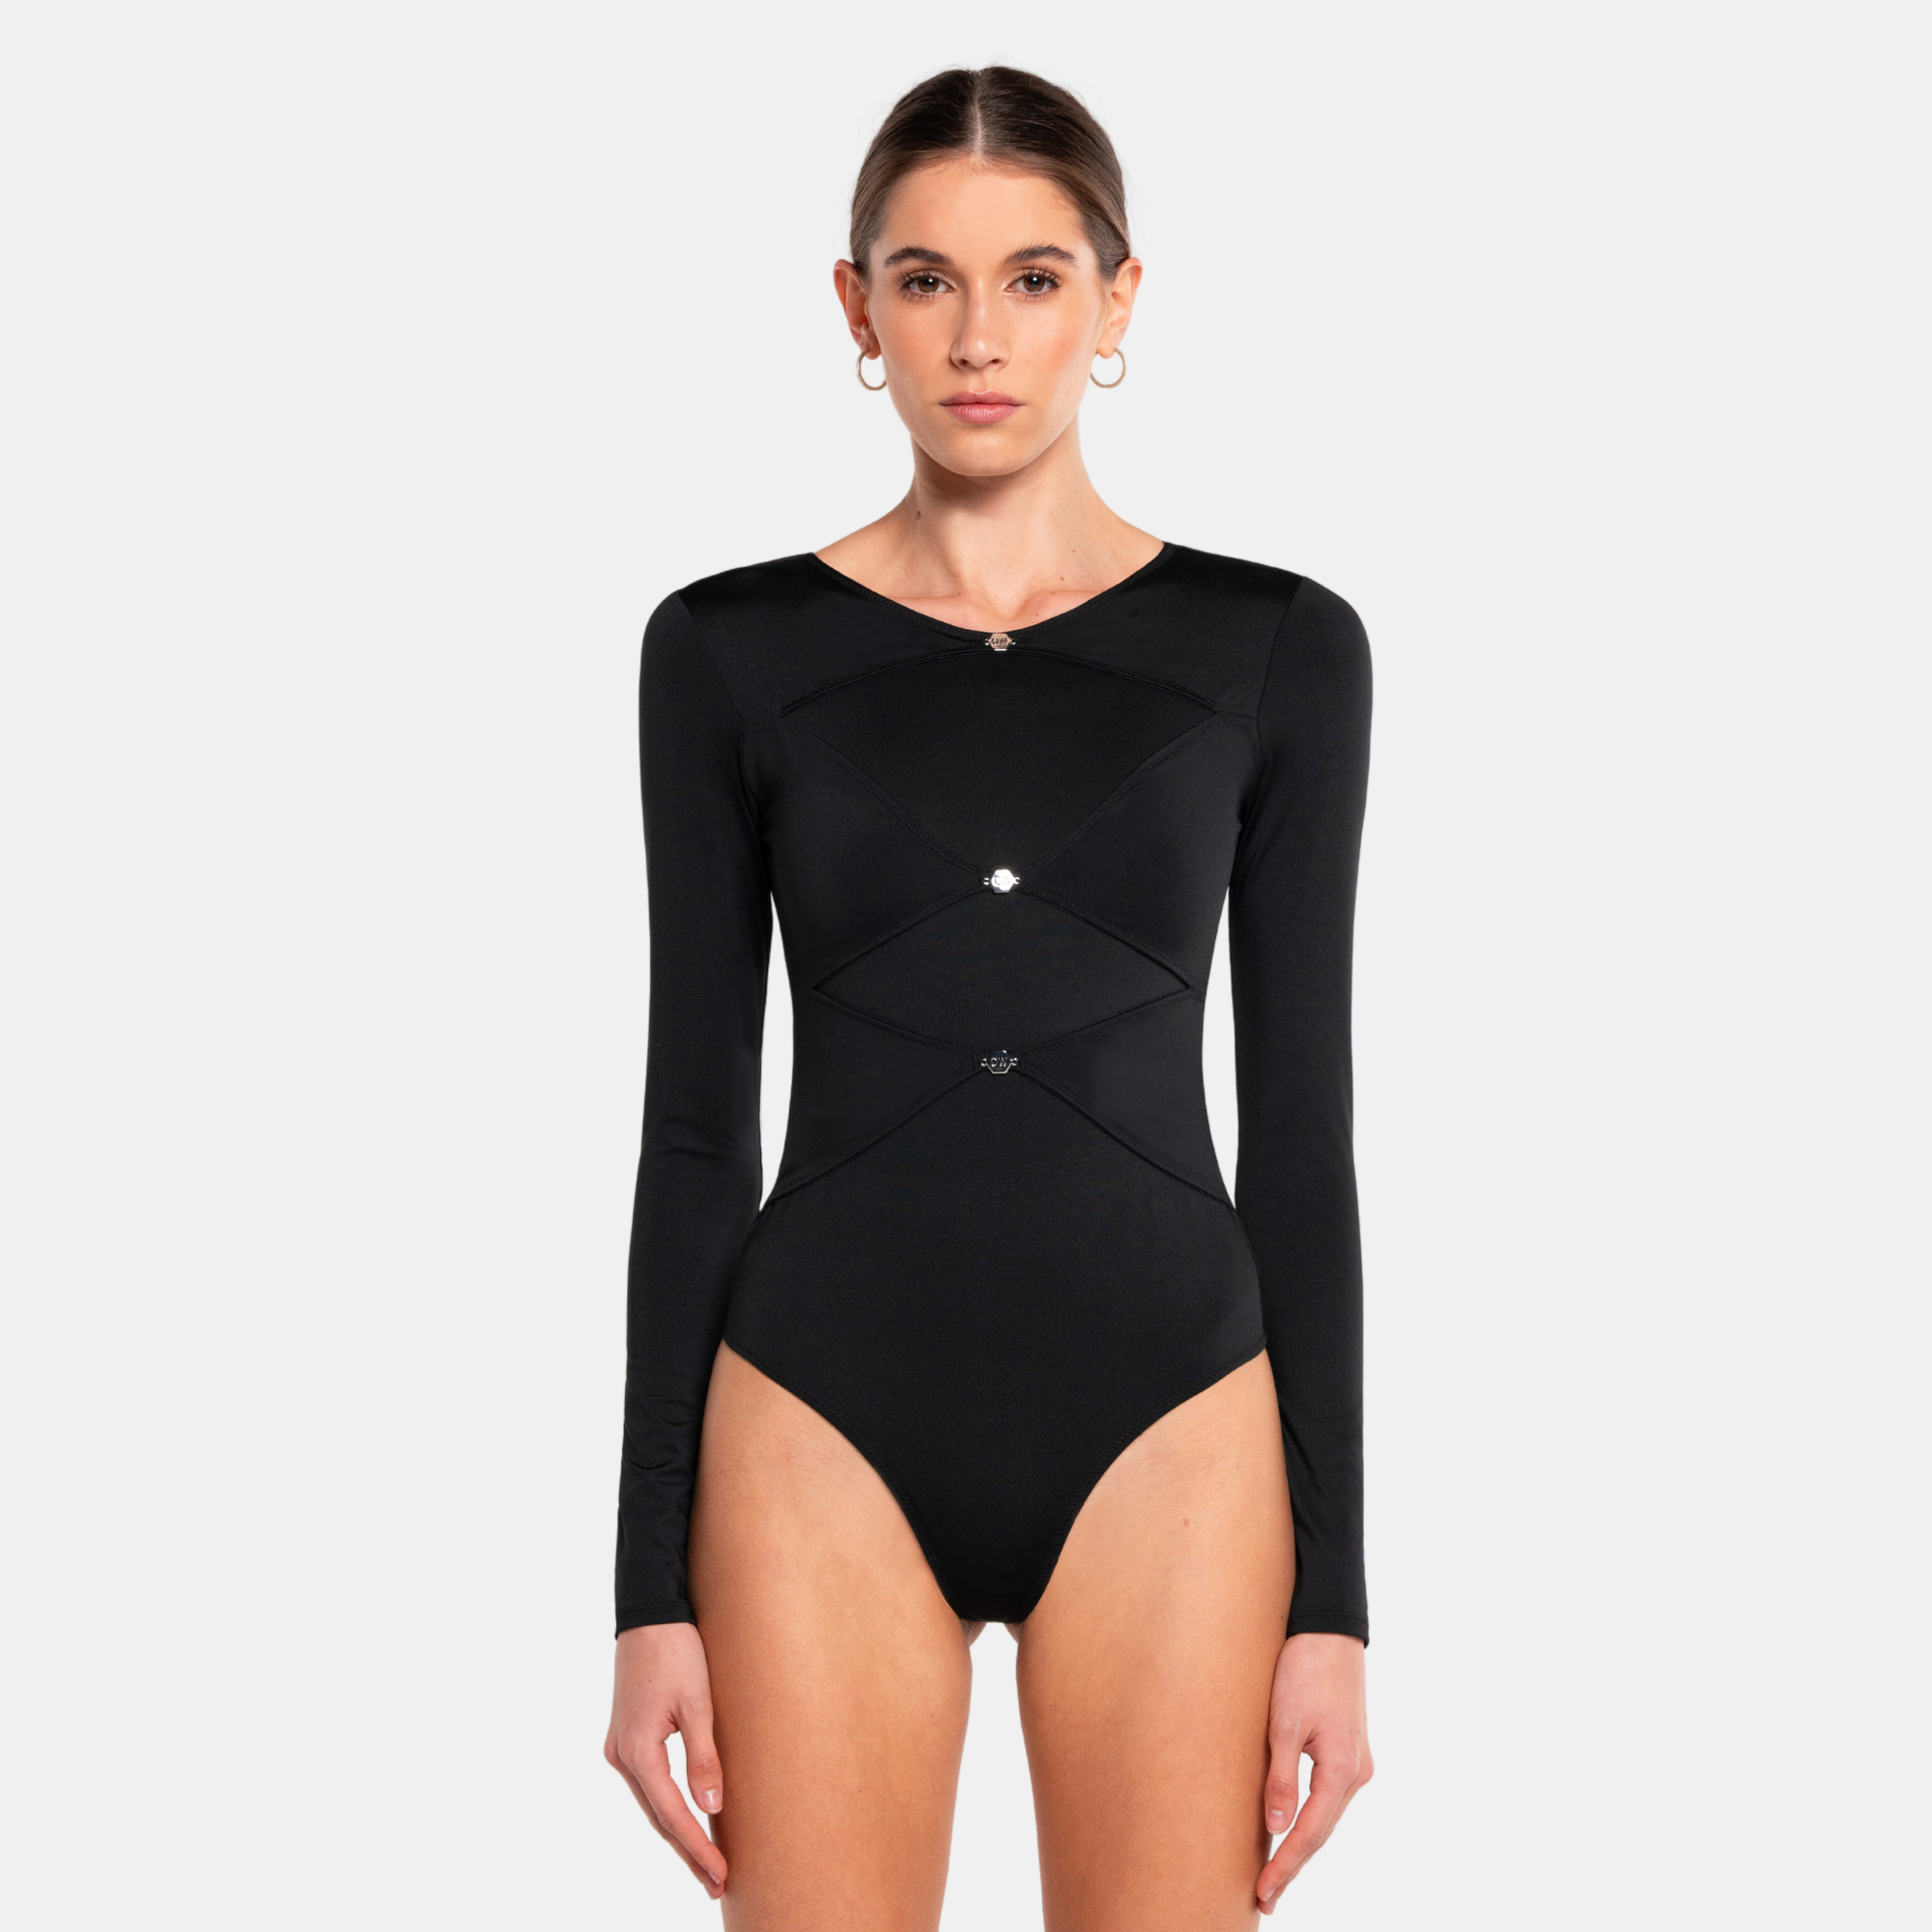 NUANYOYO COLORIVER Ice Silk Ion Sculpting Bodysuit with Snaps,COLORIVER Sculpting  Bodysuit,Shapewear Bodysuit for Women Tummy (Black,2XL) at  Women's  Clothing store